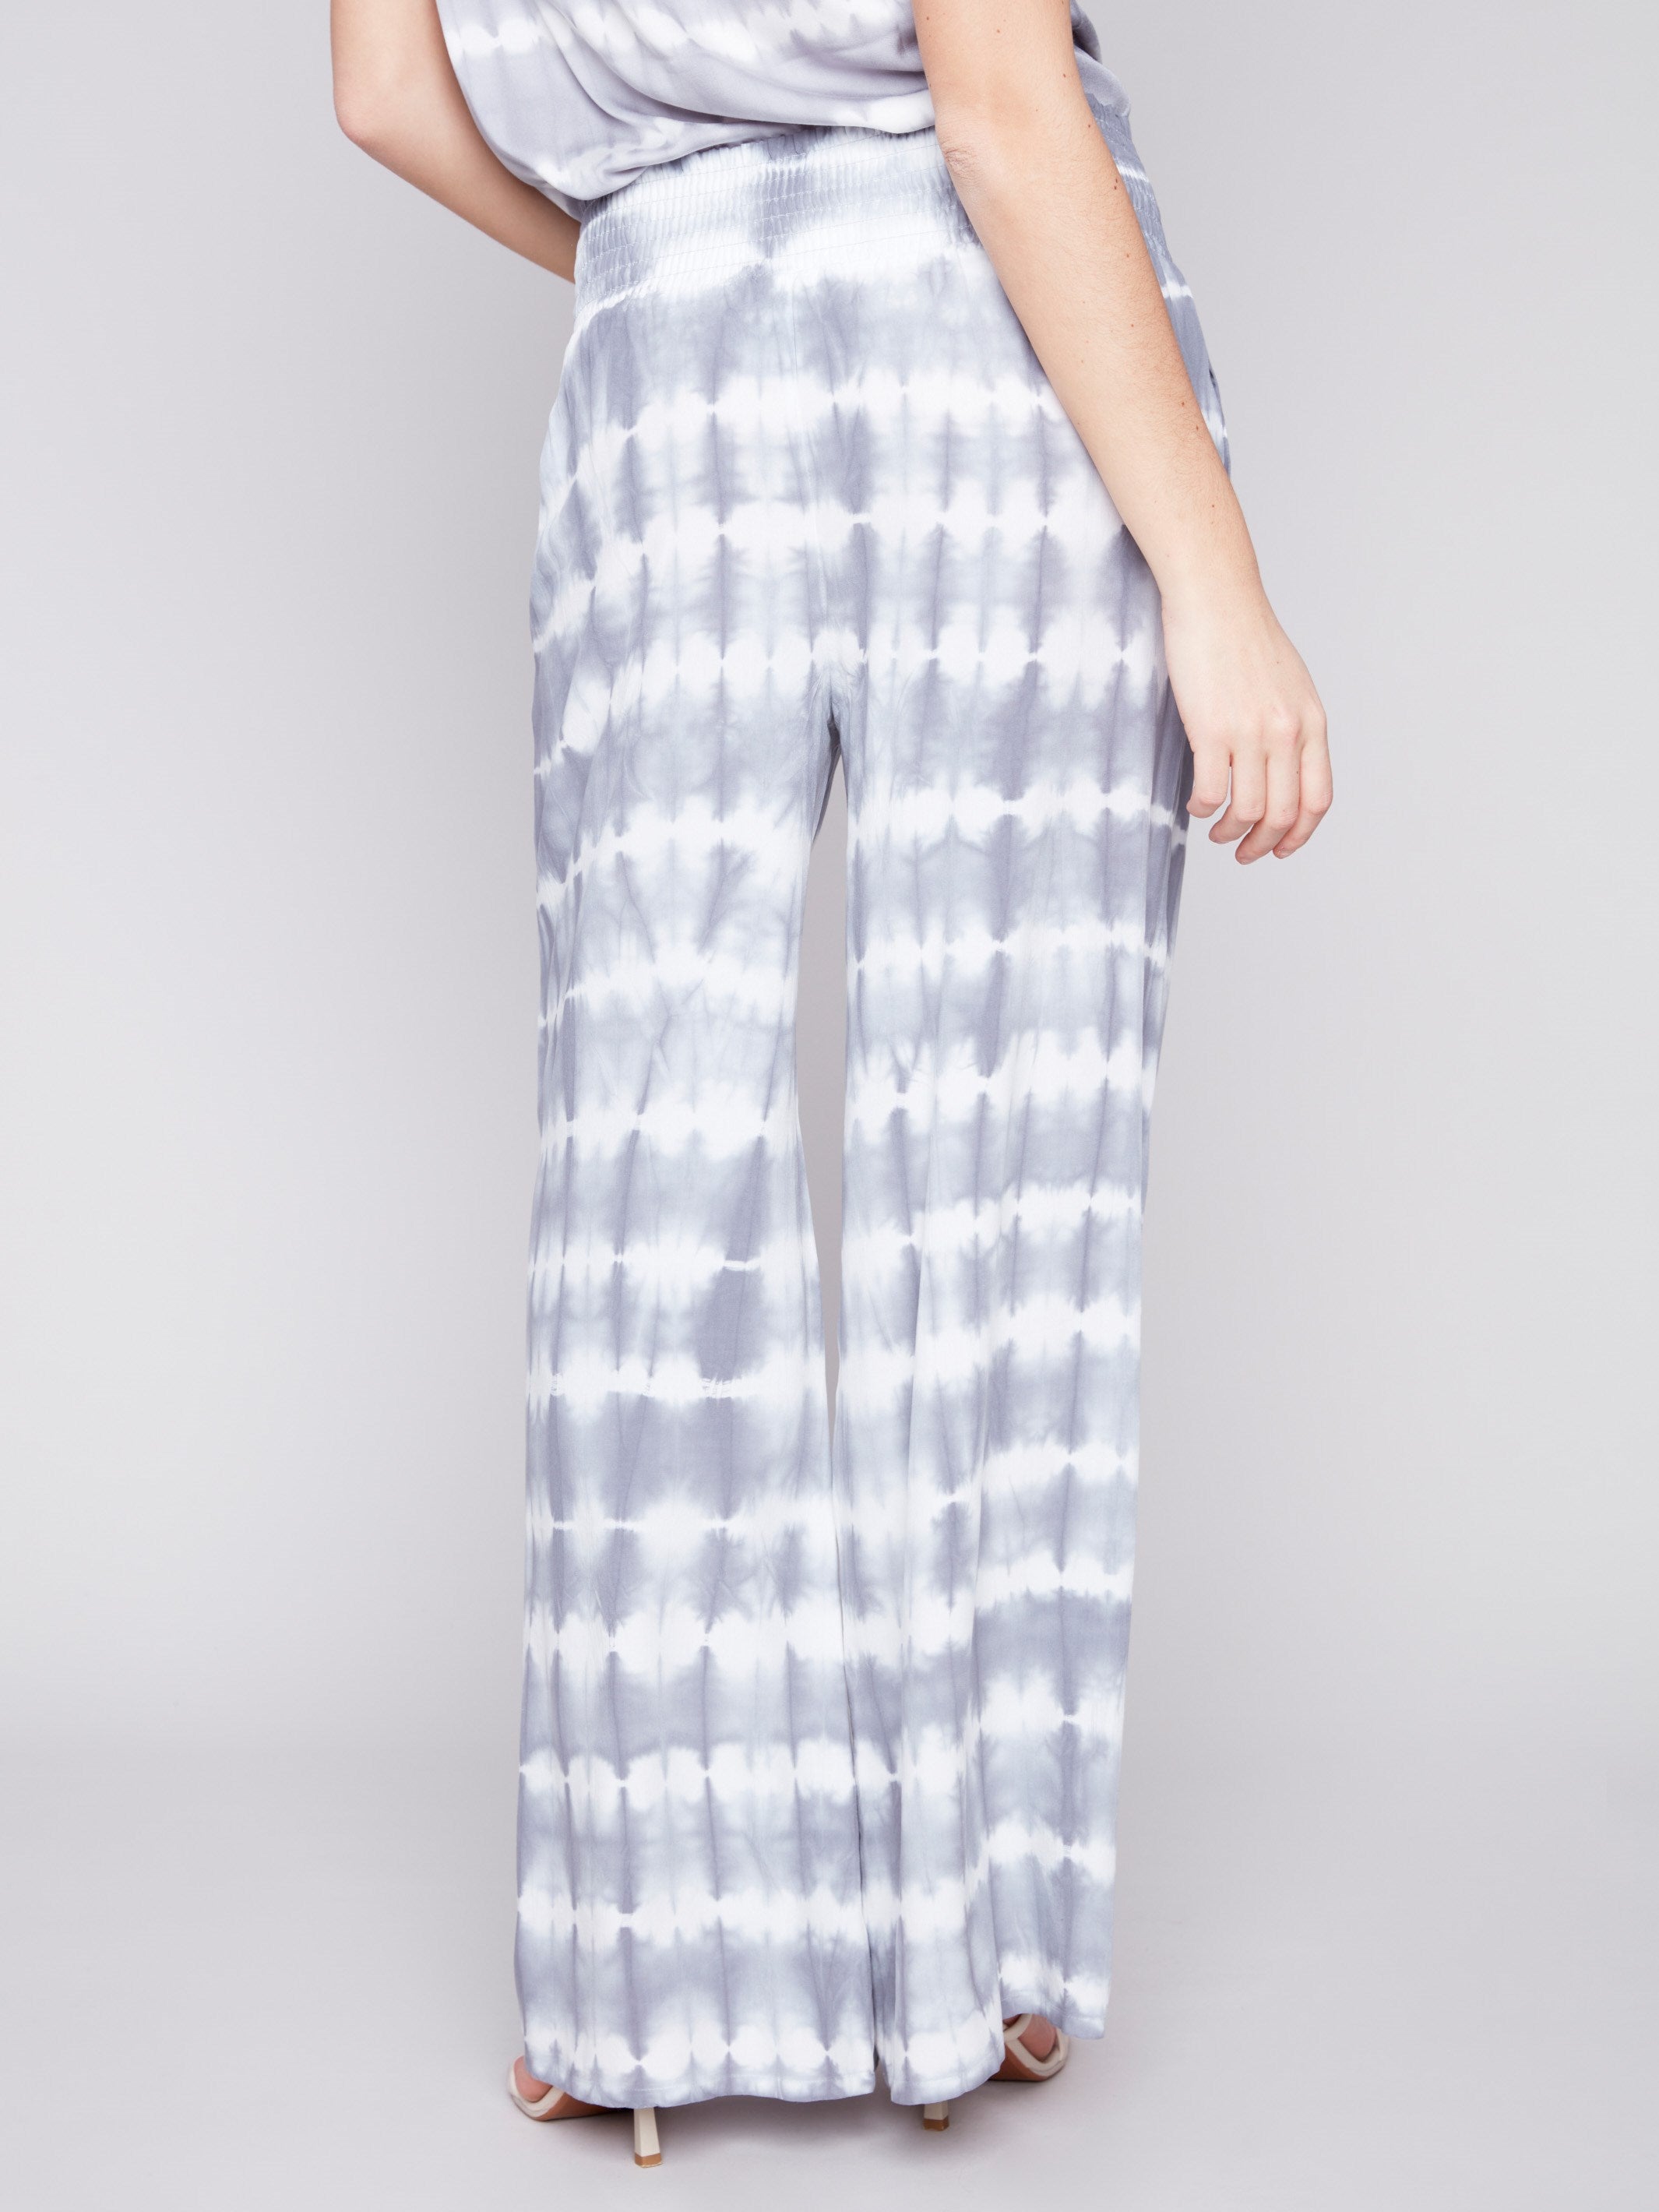 Printed Flowy Palazzo Pants - Ceramic - Charlie B Collection Canada - Image 4